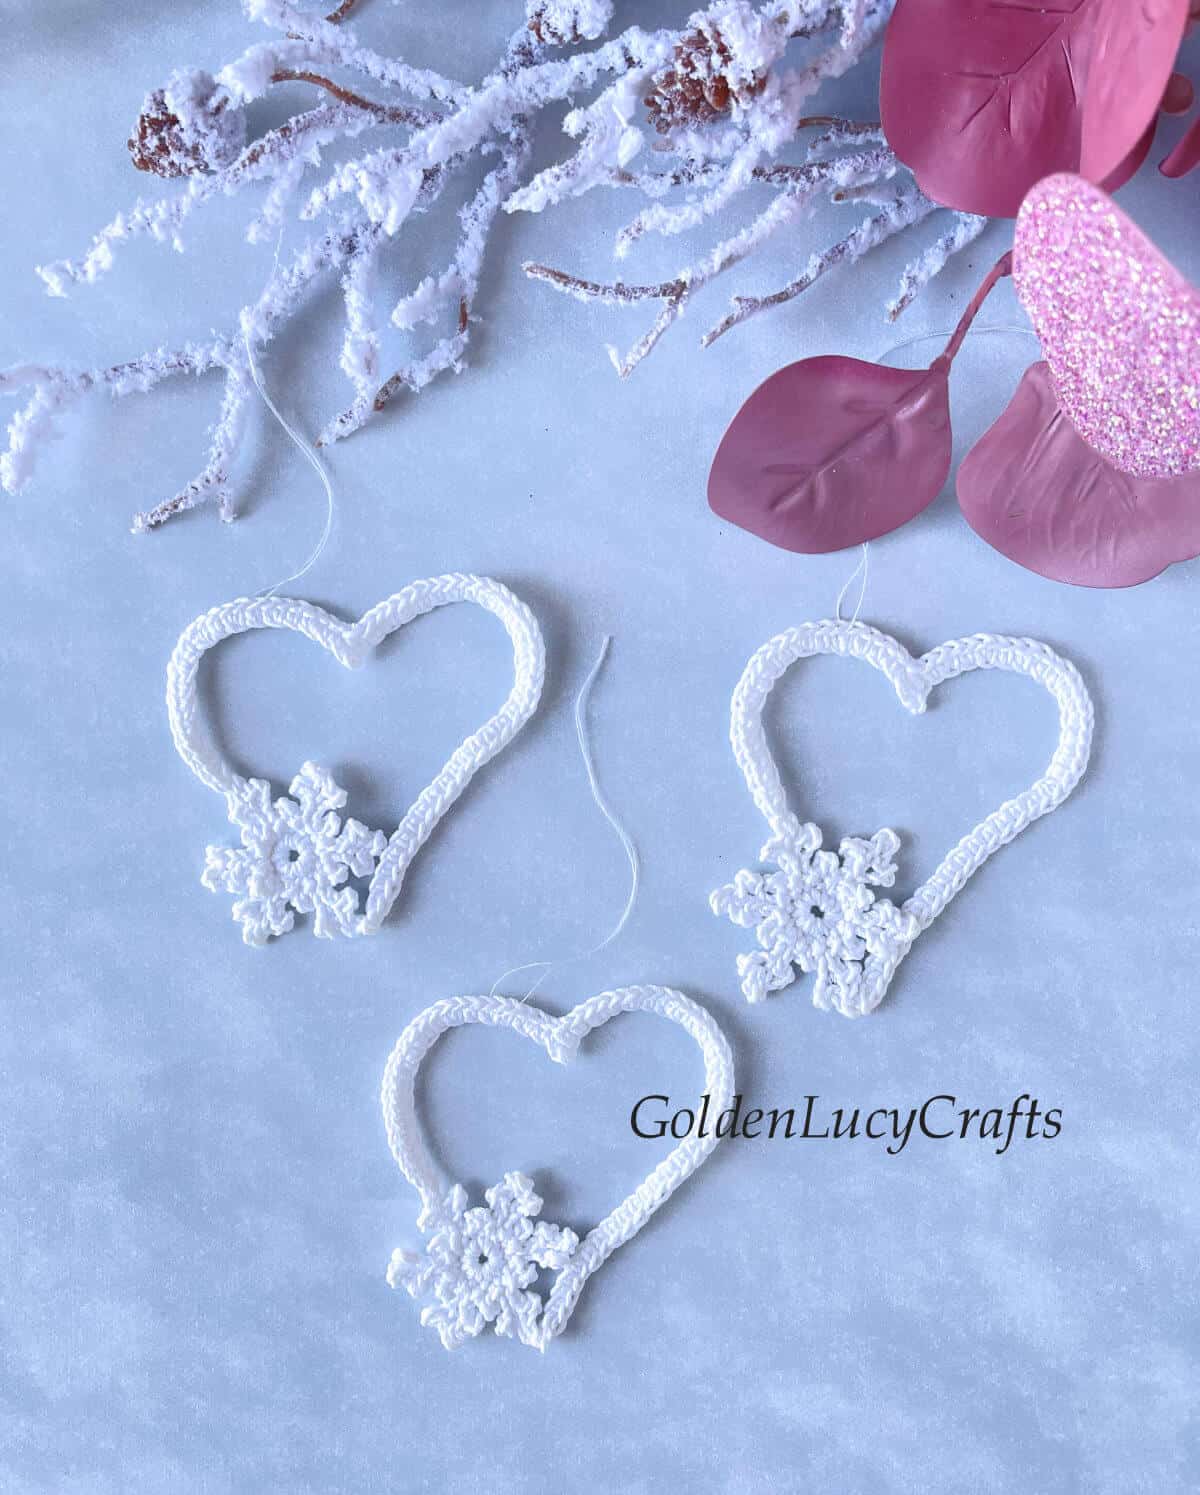 Three crocheted white hearts with small snowflakes.